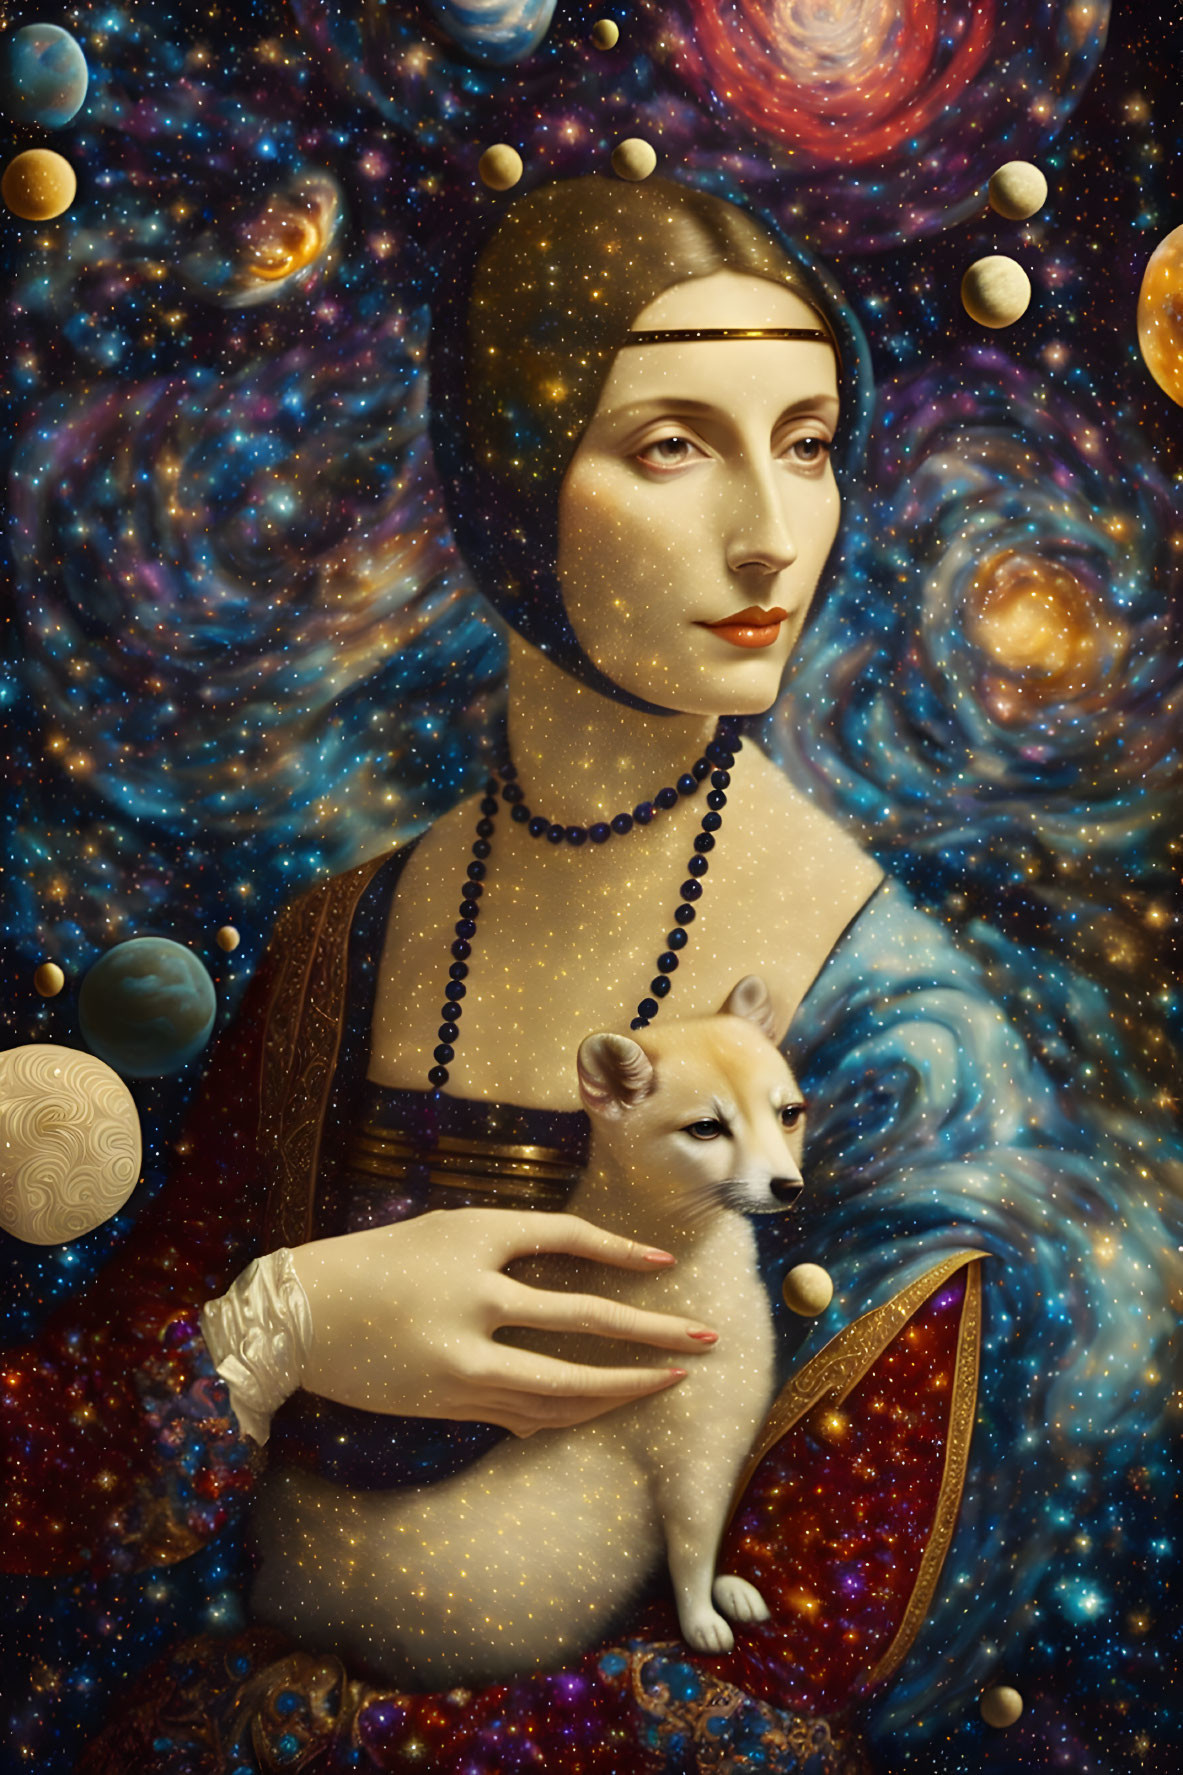 “Lady with Ermine” In The Cosmos 